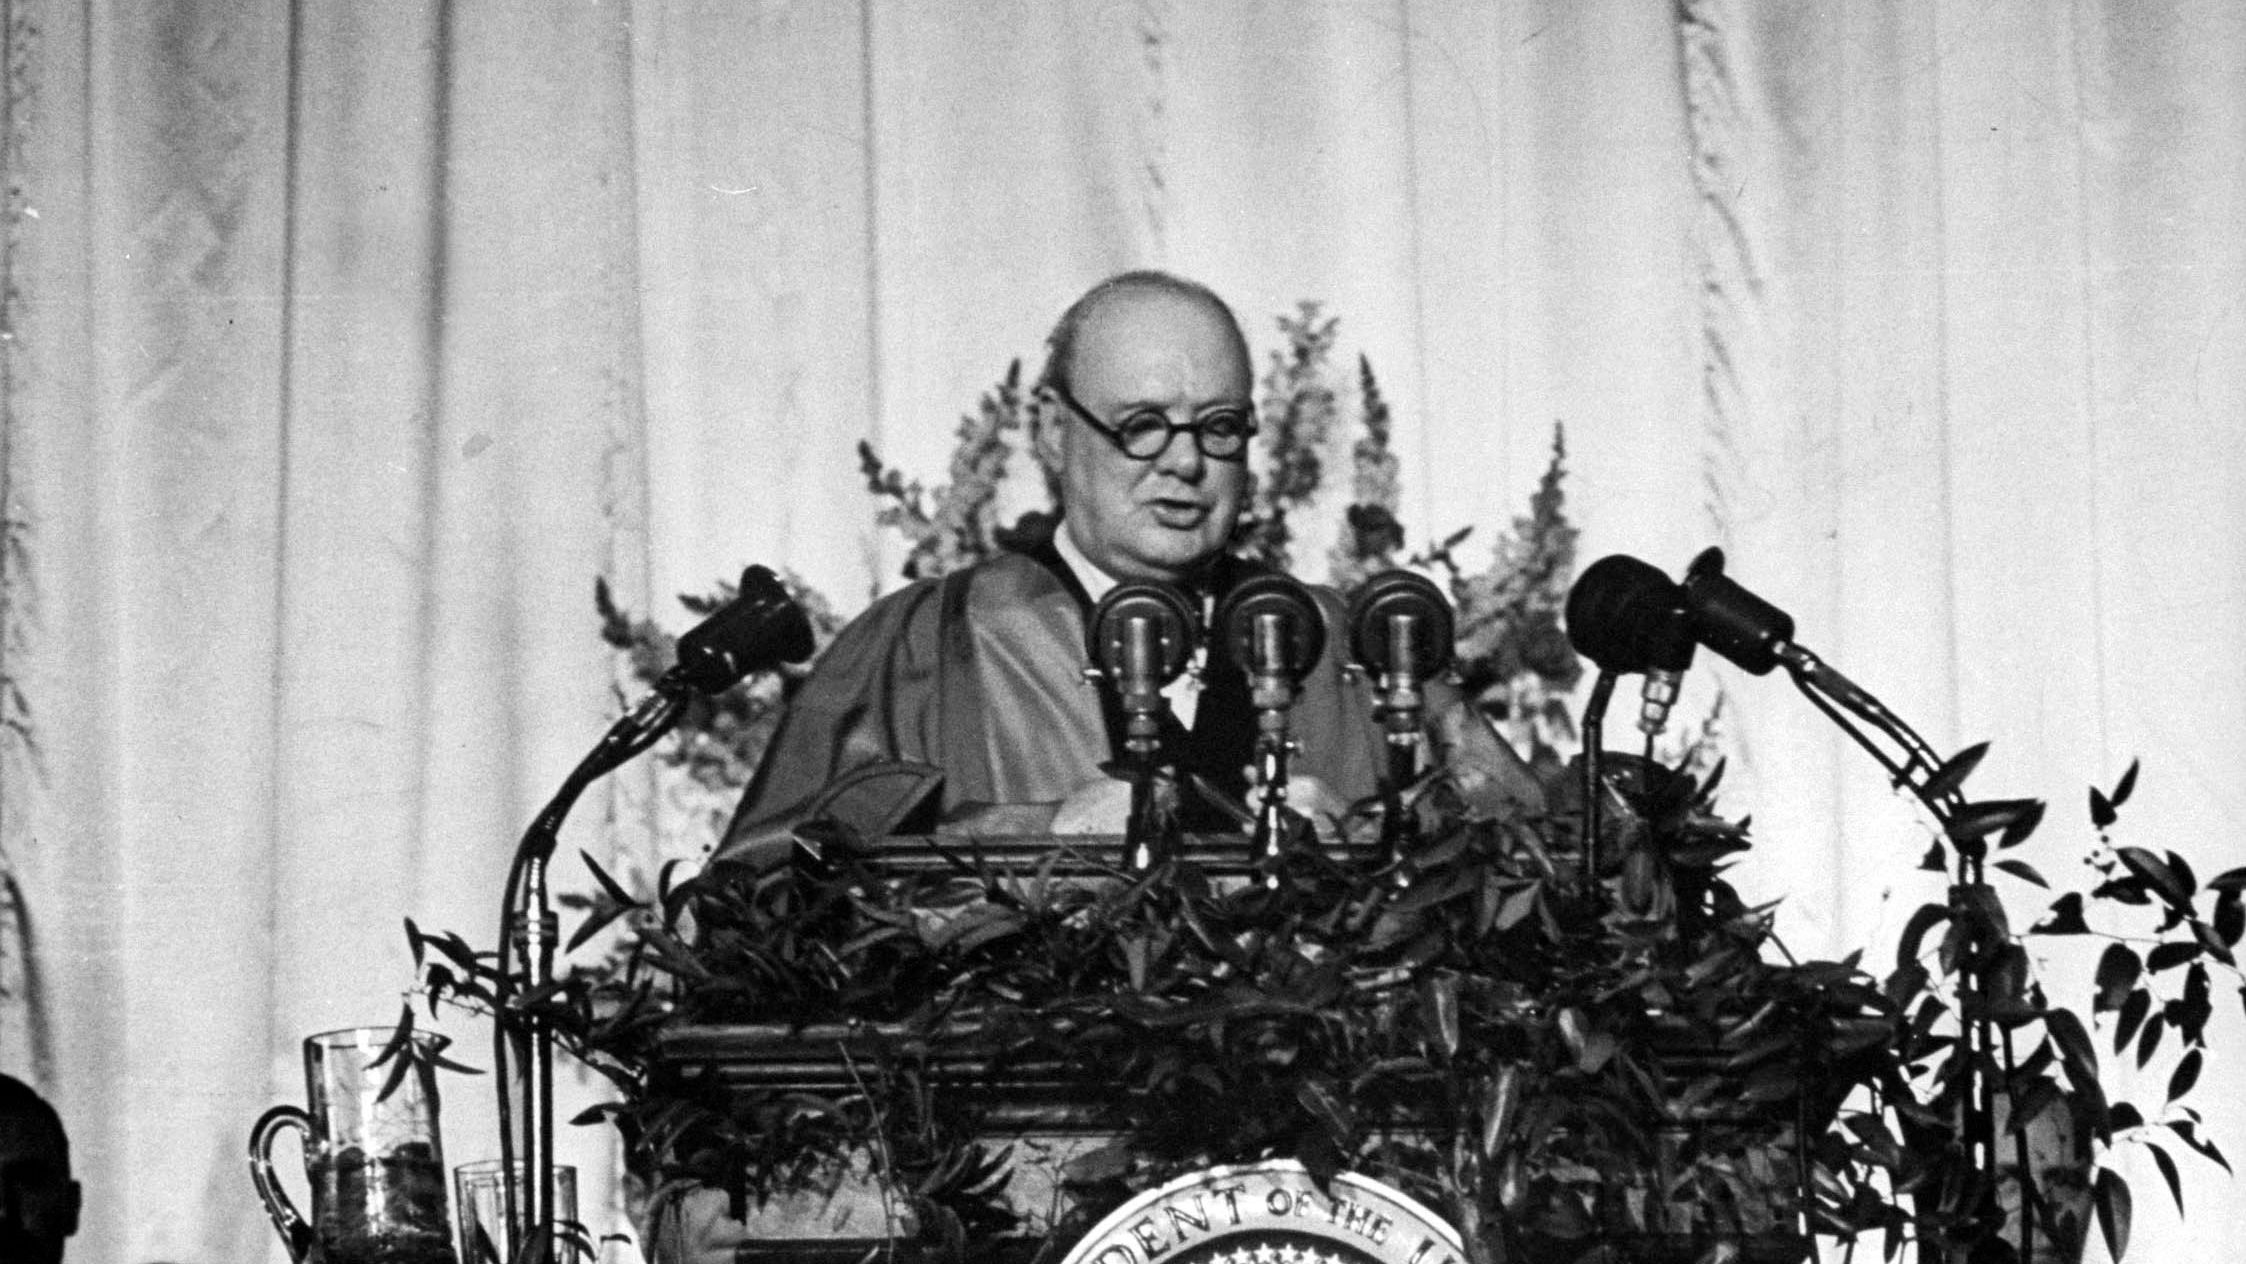 British Prime Minister Winston Churchill delivers a speech at Westminster College in Fulton, Missouri, on March 5, 1946. "From Stettin in the Baltic to Trieste in the Adriatic, an Iron Curtain has descended across the Continent," he declared.